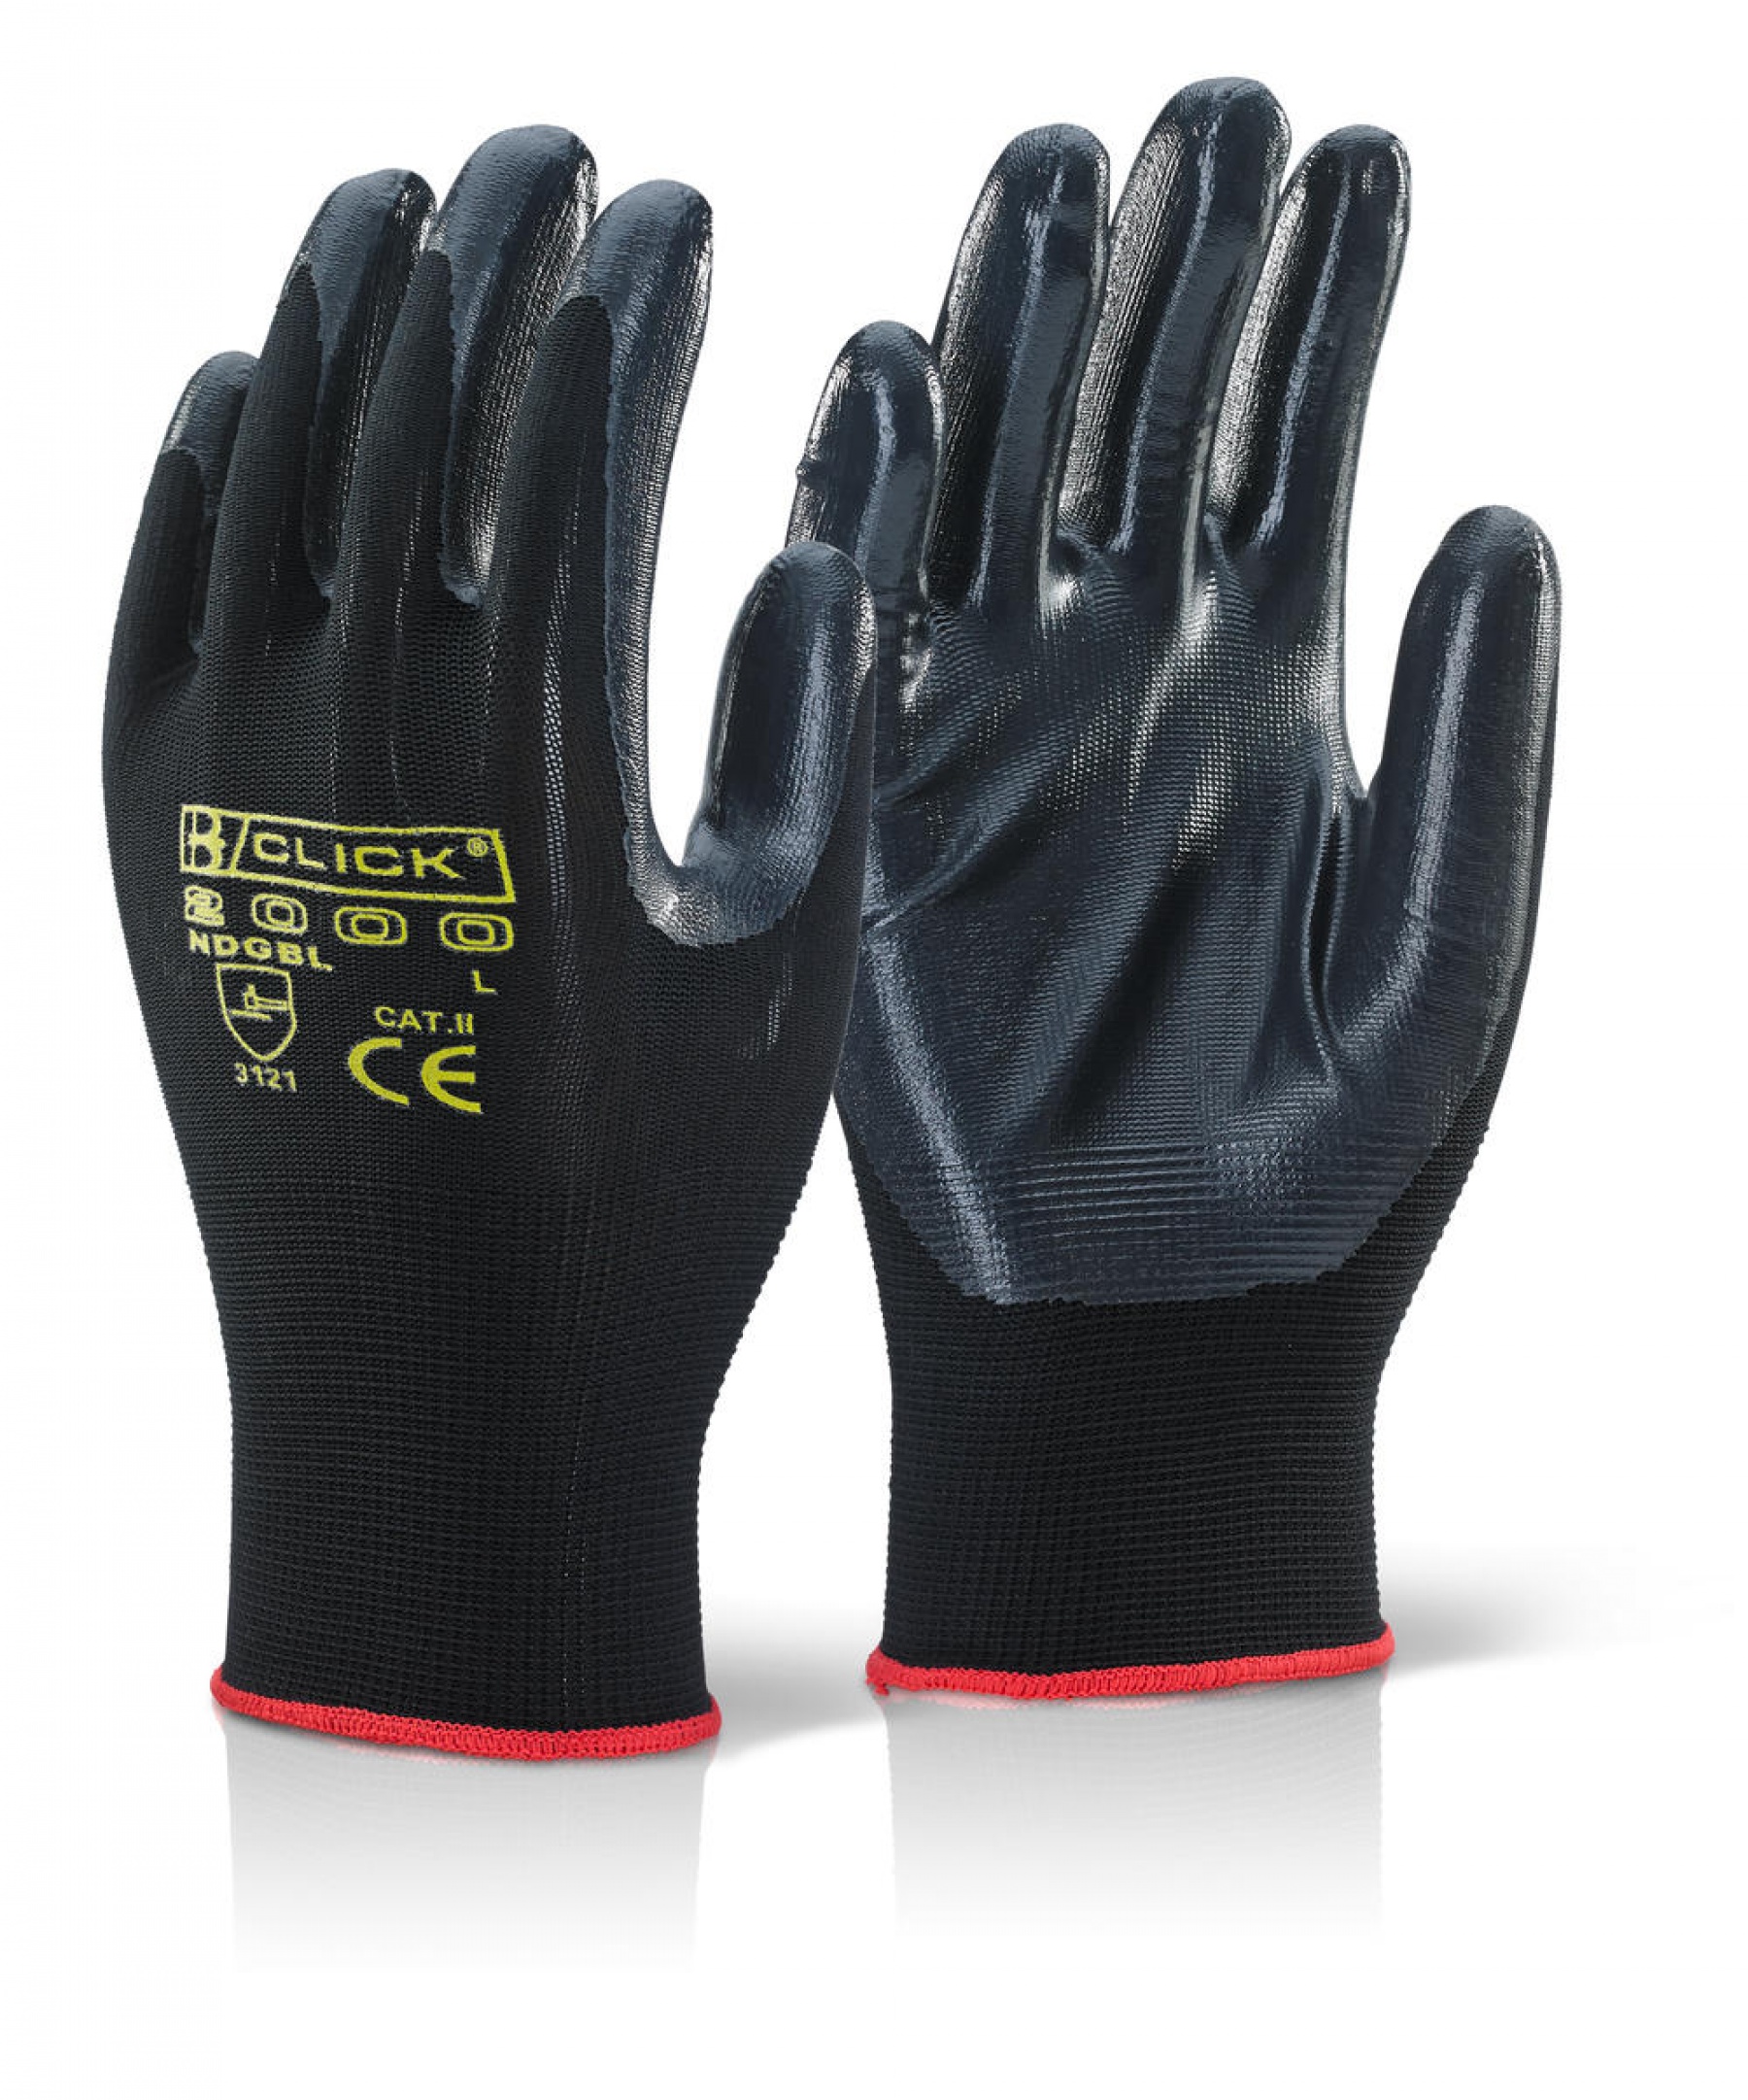 Buy Nitrile Coated Gloves | General Purpose Gloves from Safety Supply What Are Nitrile Coated Gloves Used For